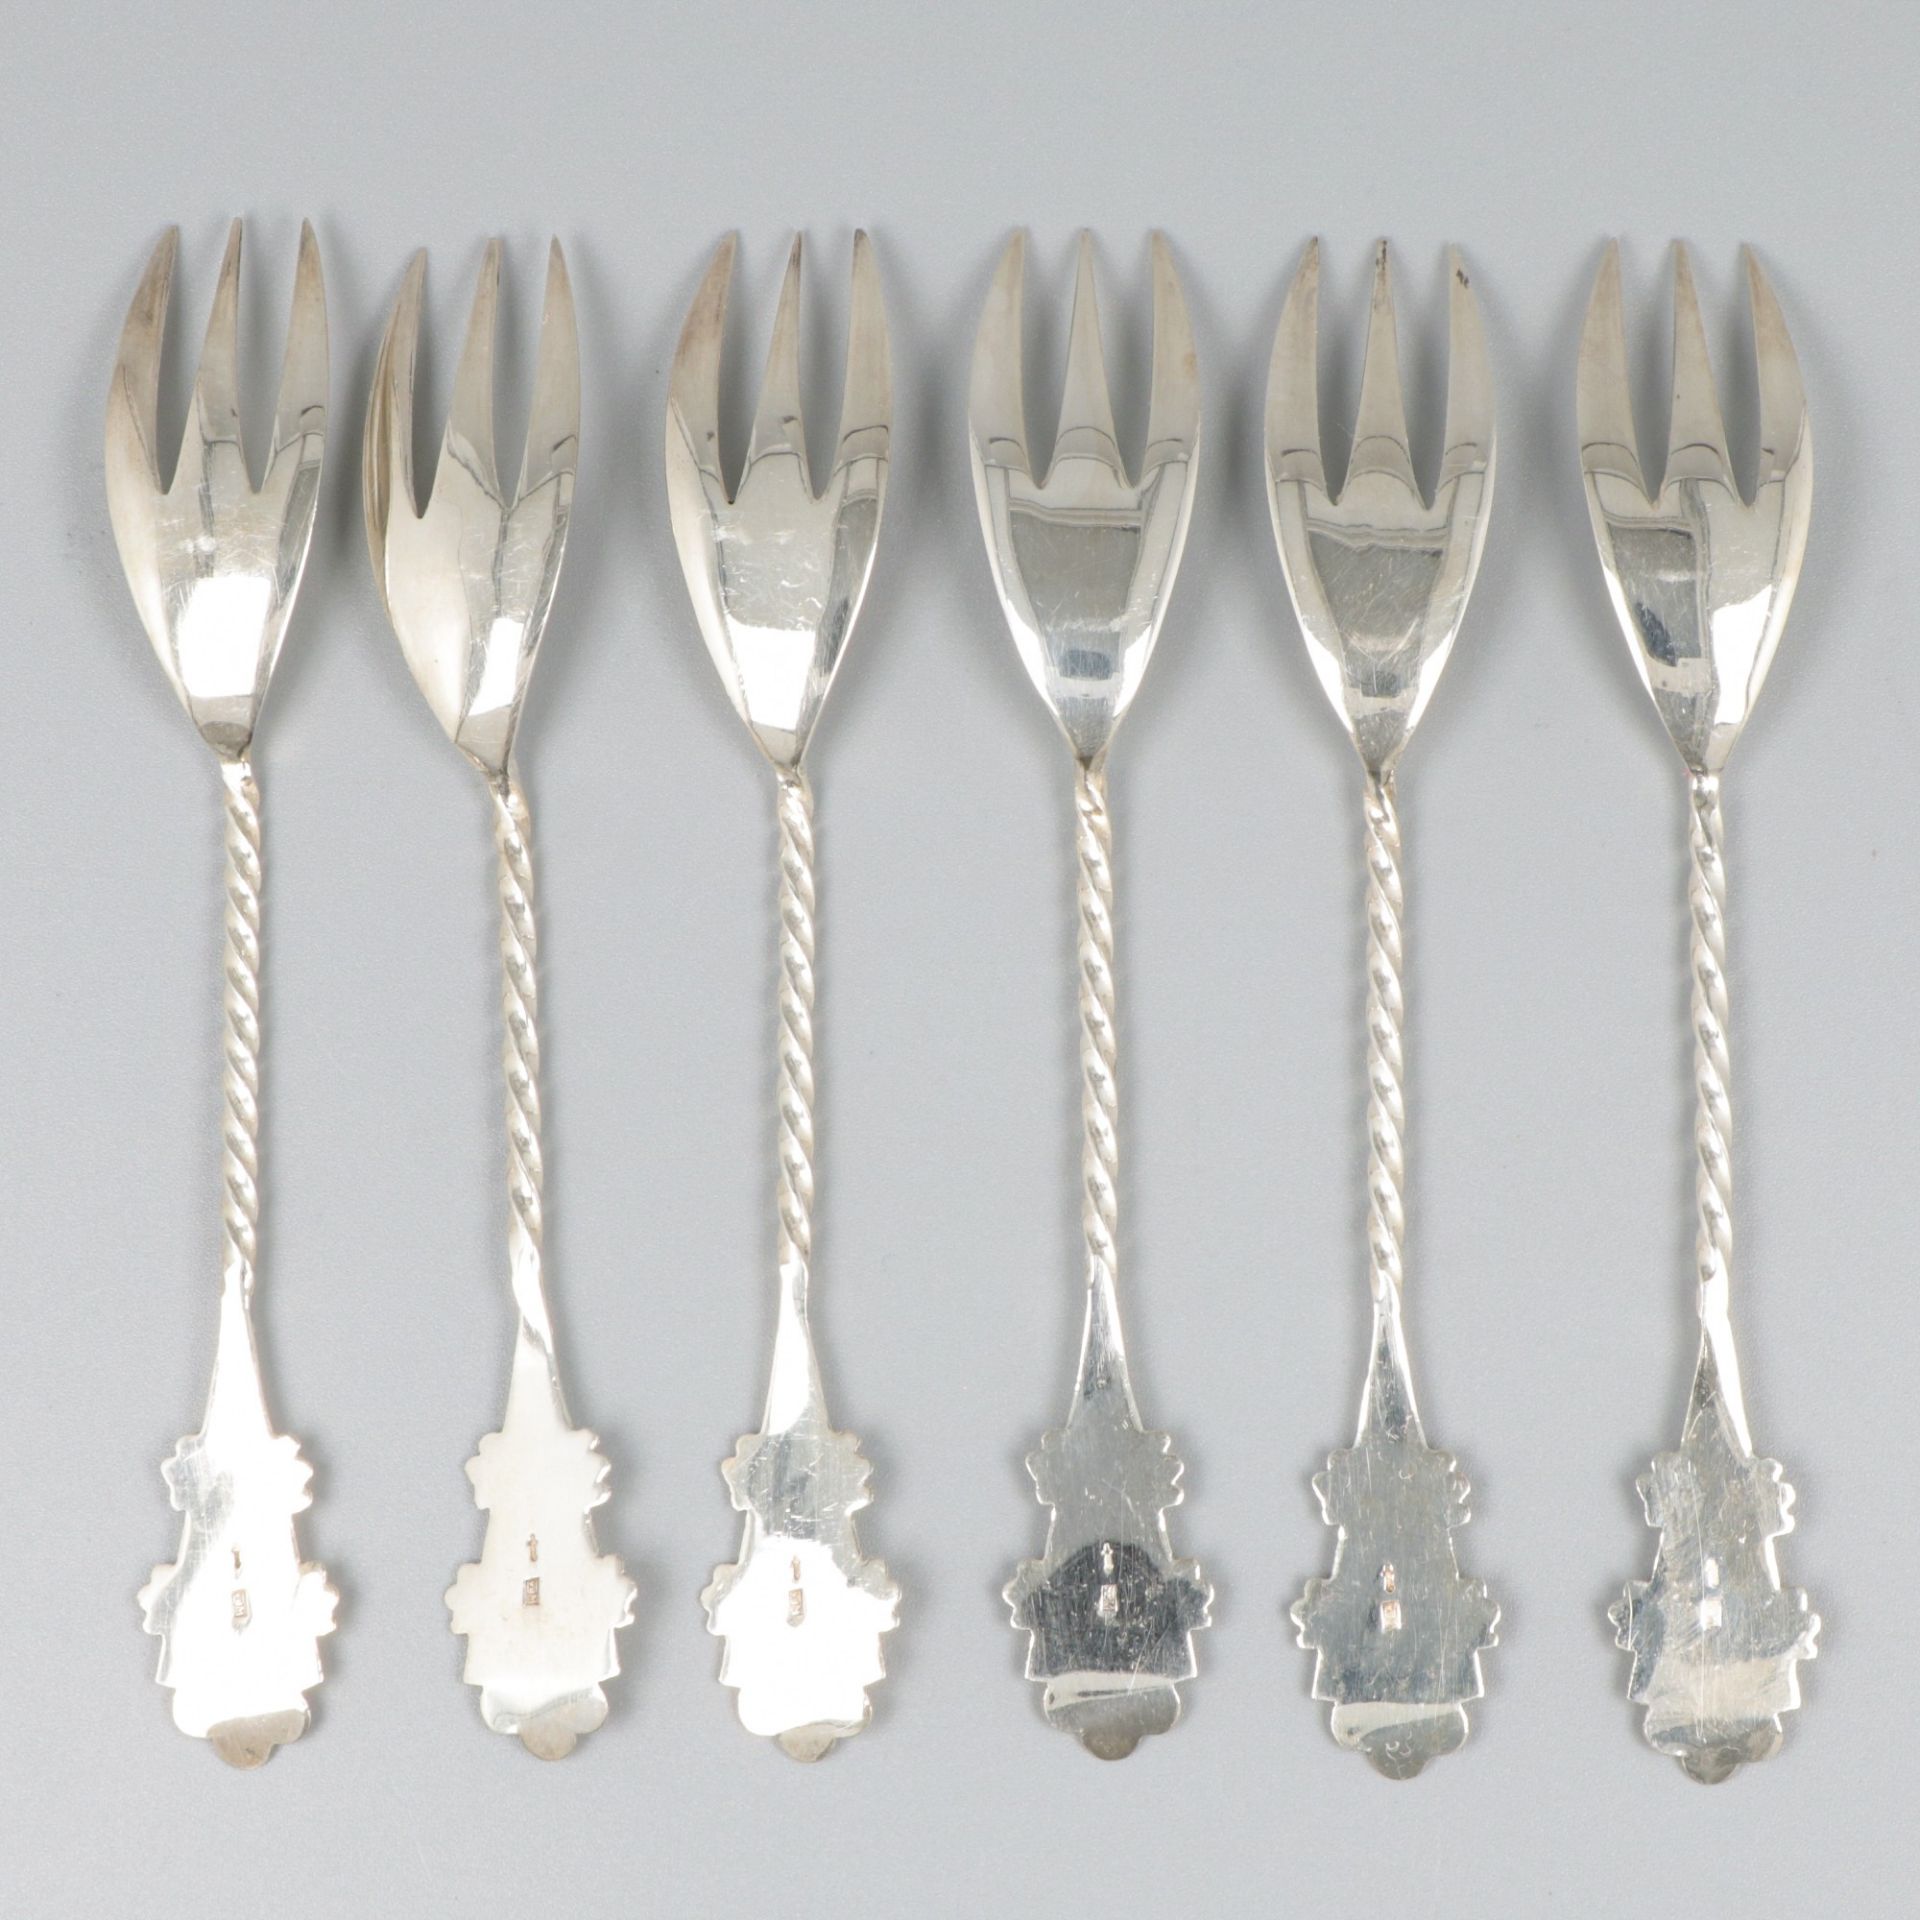 6-piece set of cake / pastry forks silver. - Image 4 of 9